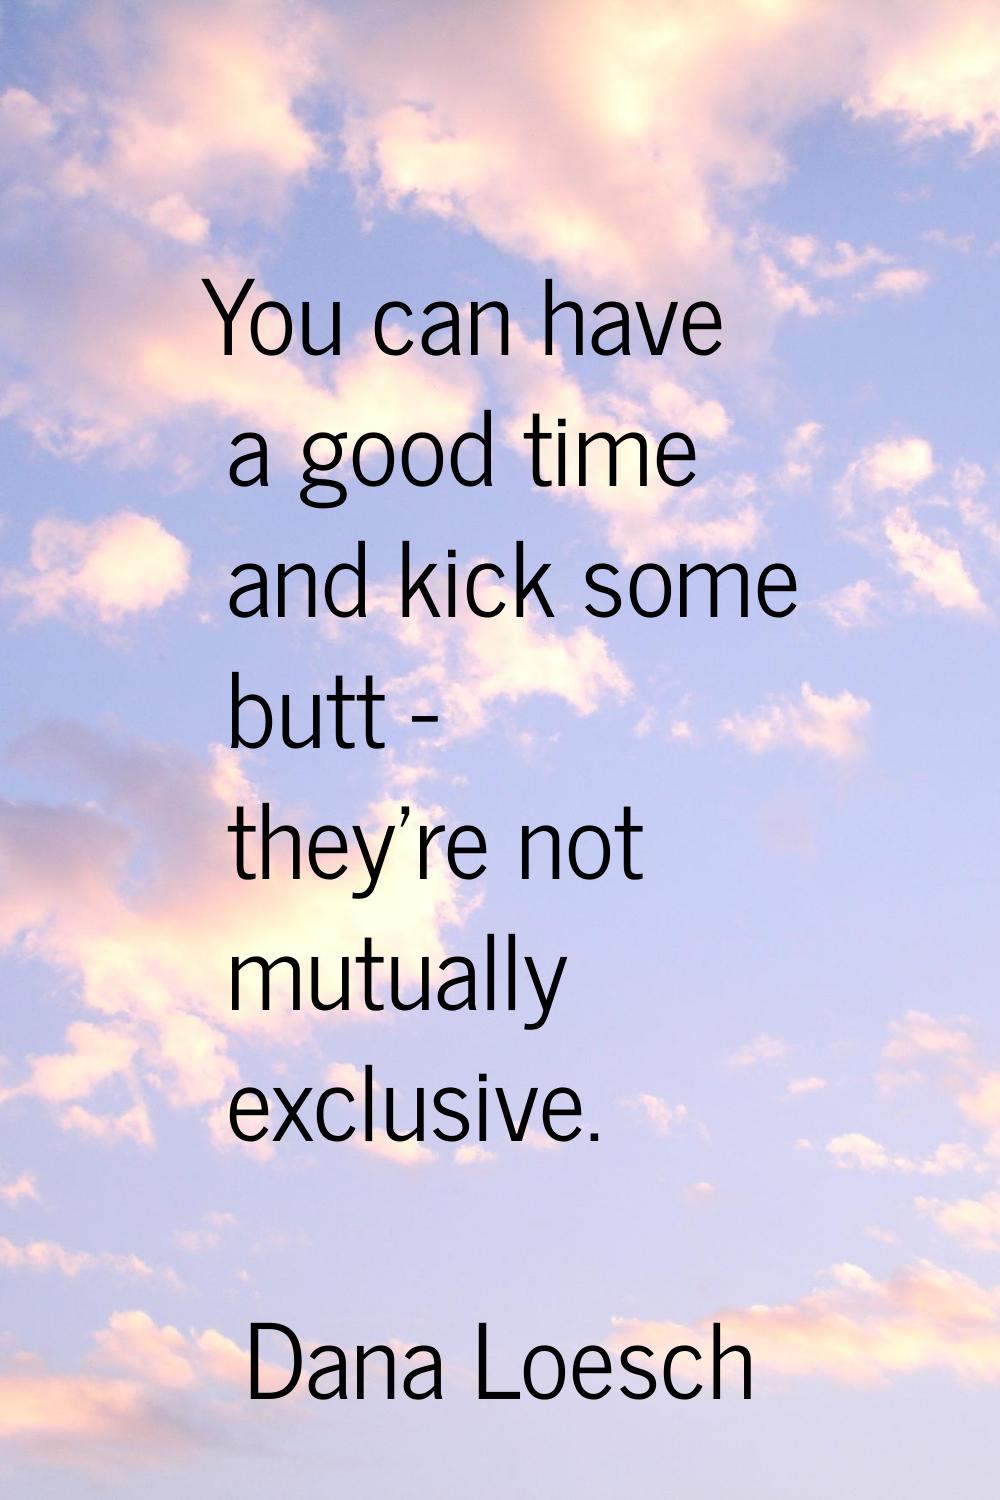 You can have a good time and kick some butt - they're not mutually exclusive.